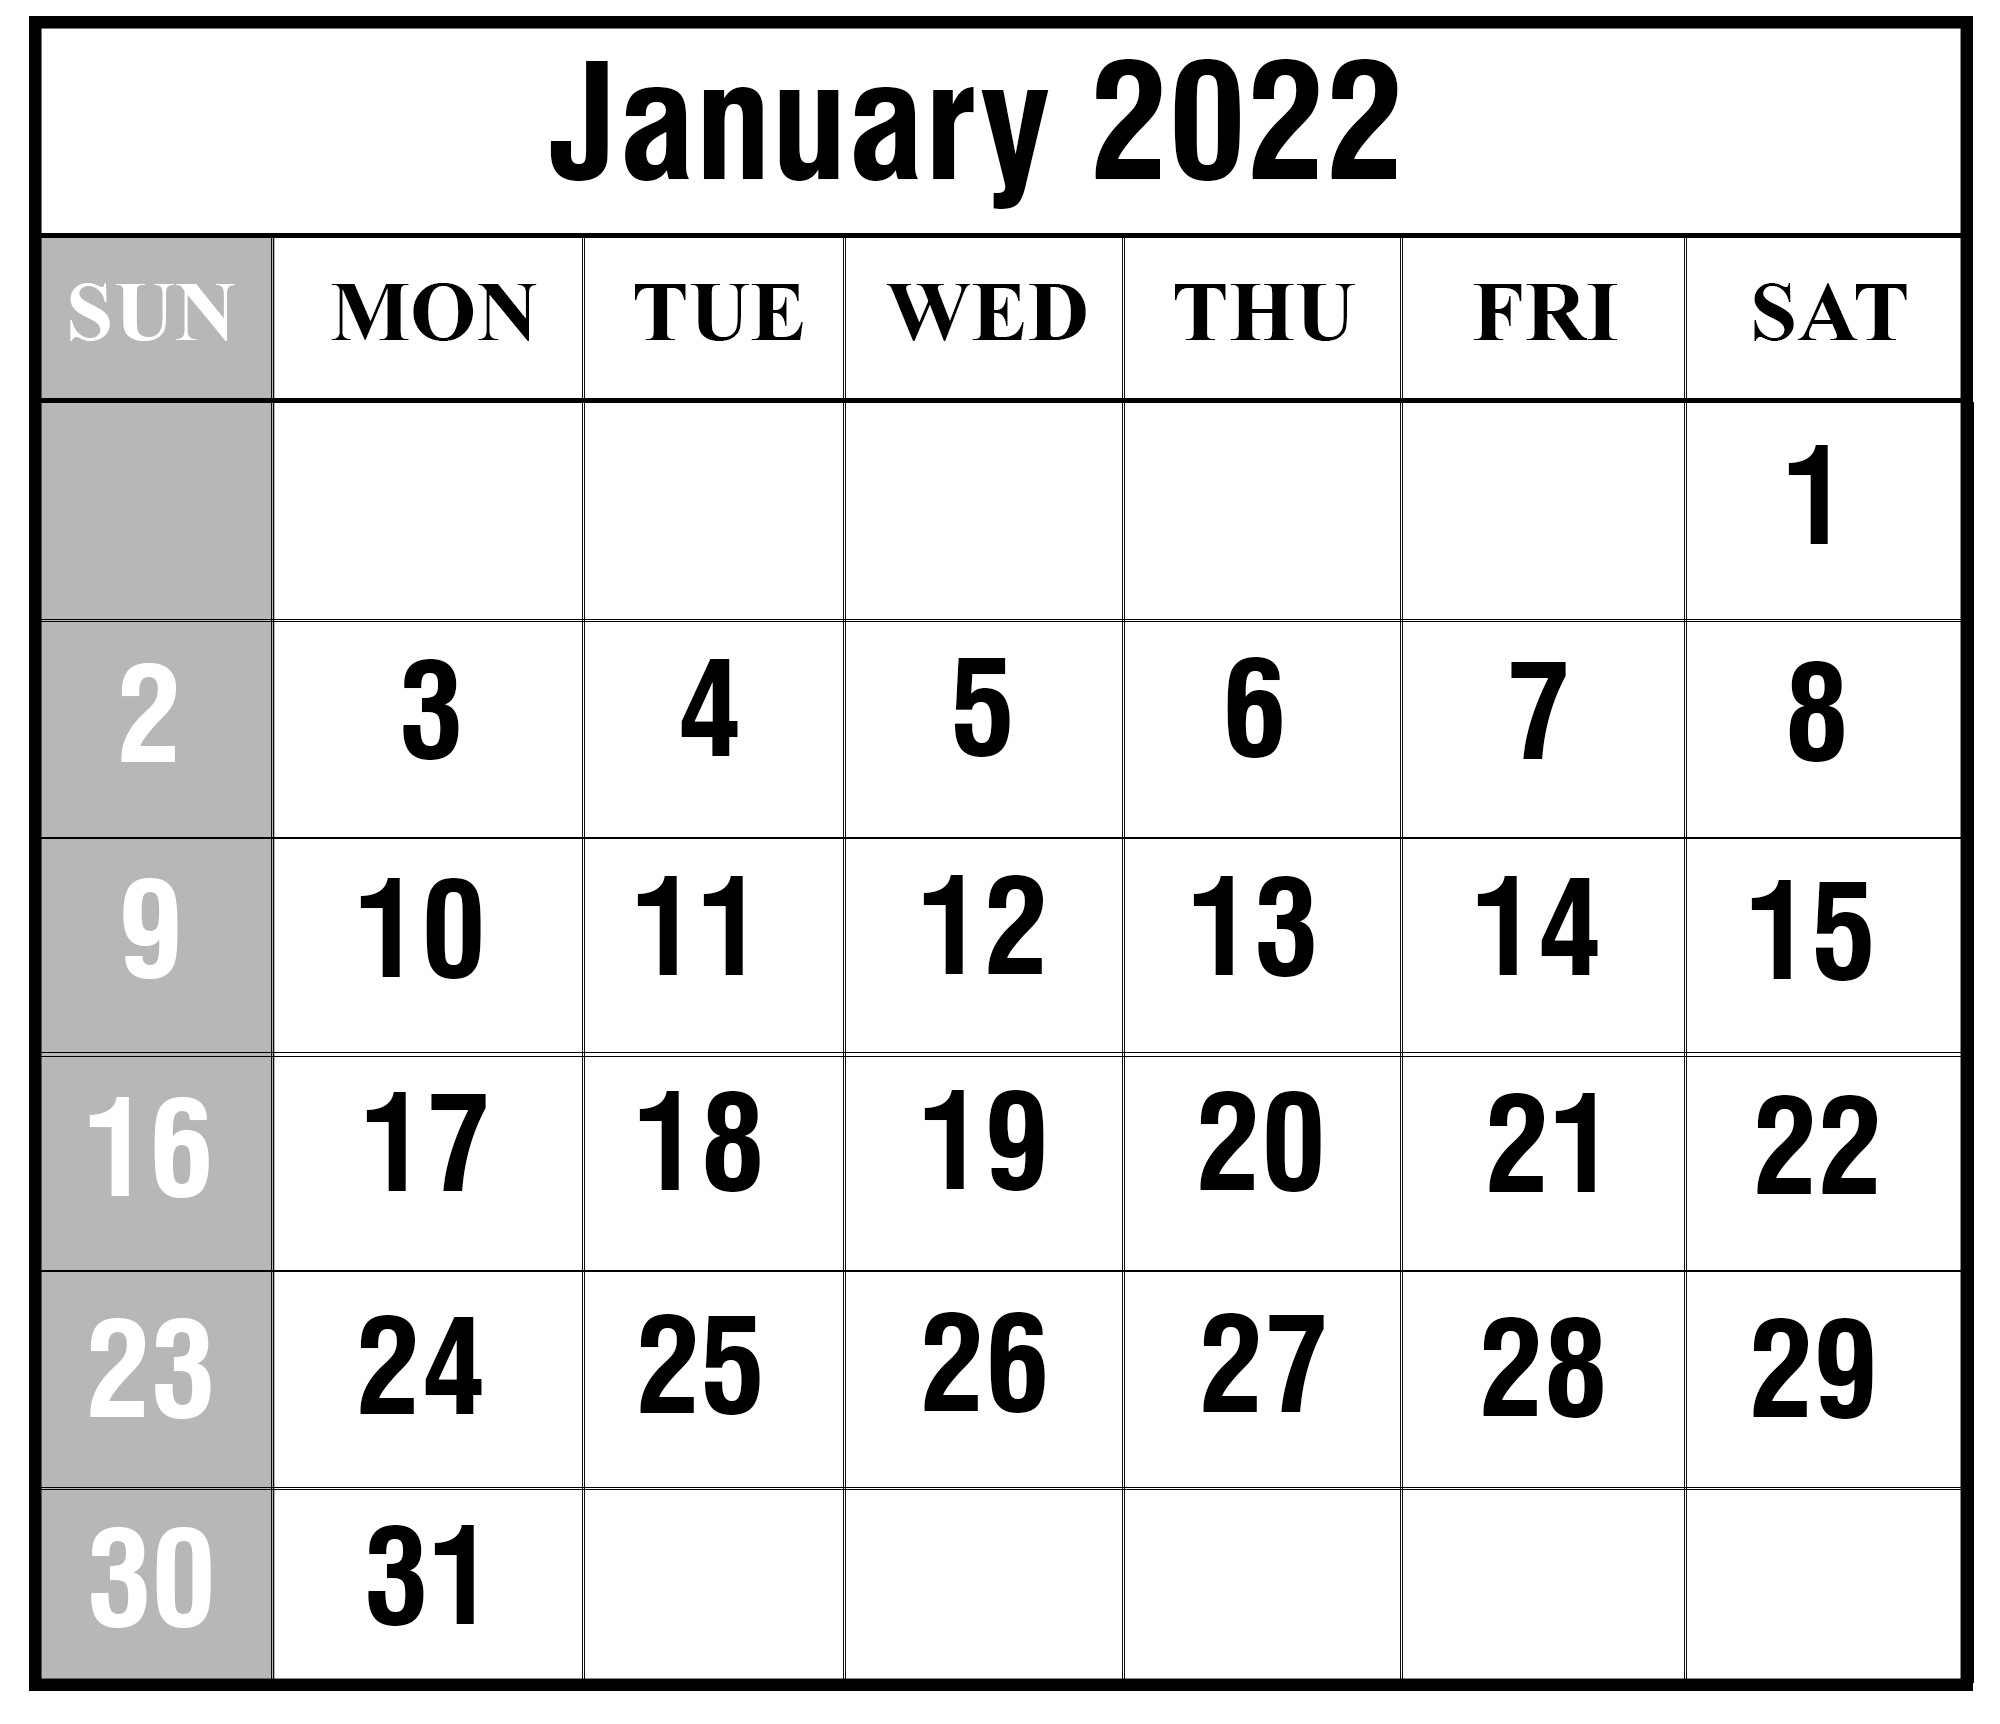 Collect January 2022 Calendar With Us Holidays